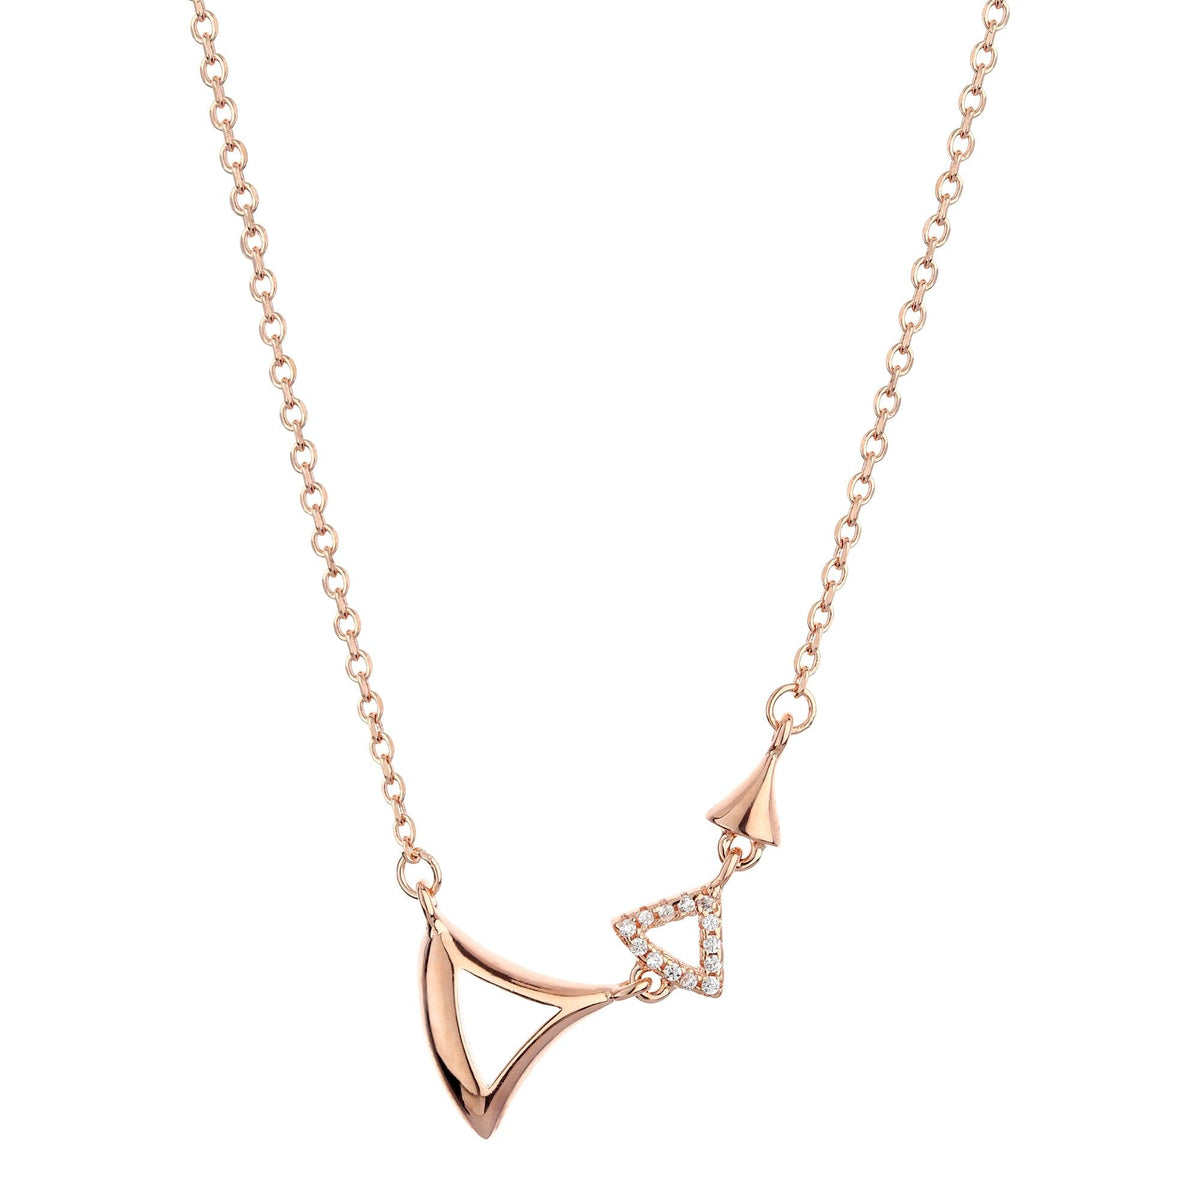 Bright Layered Golden Triangle Necklace - silvermark